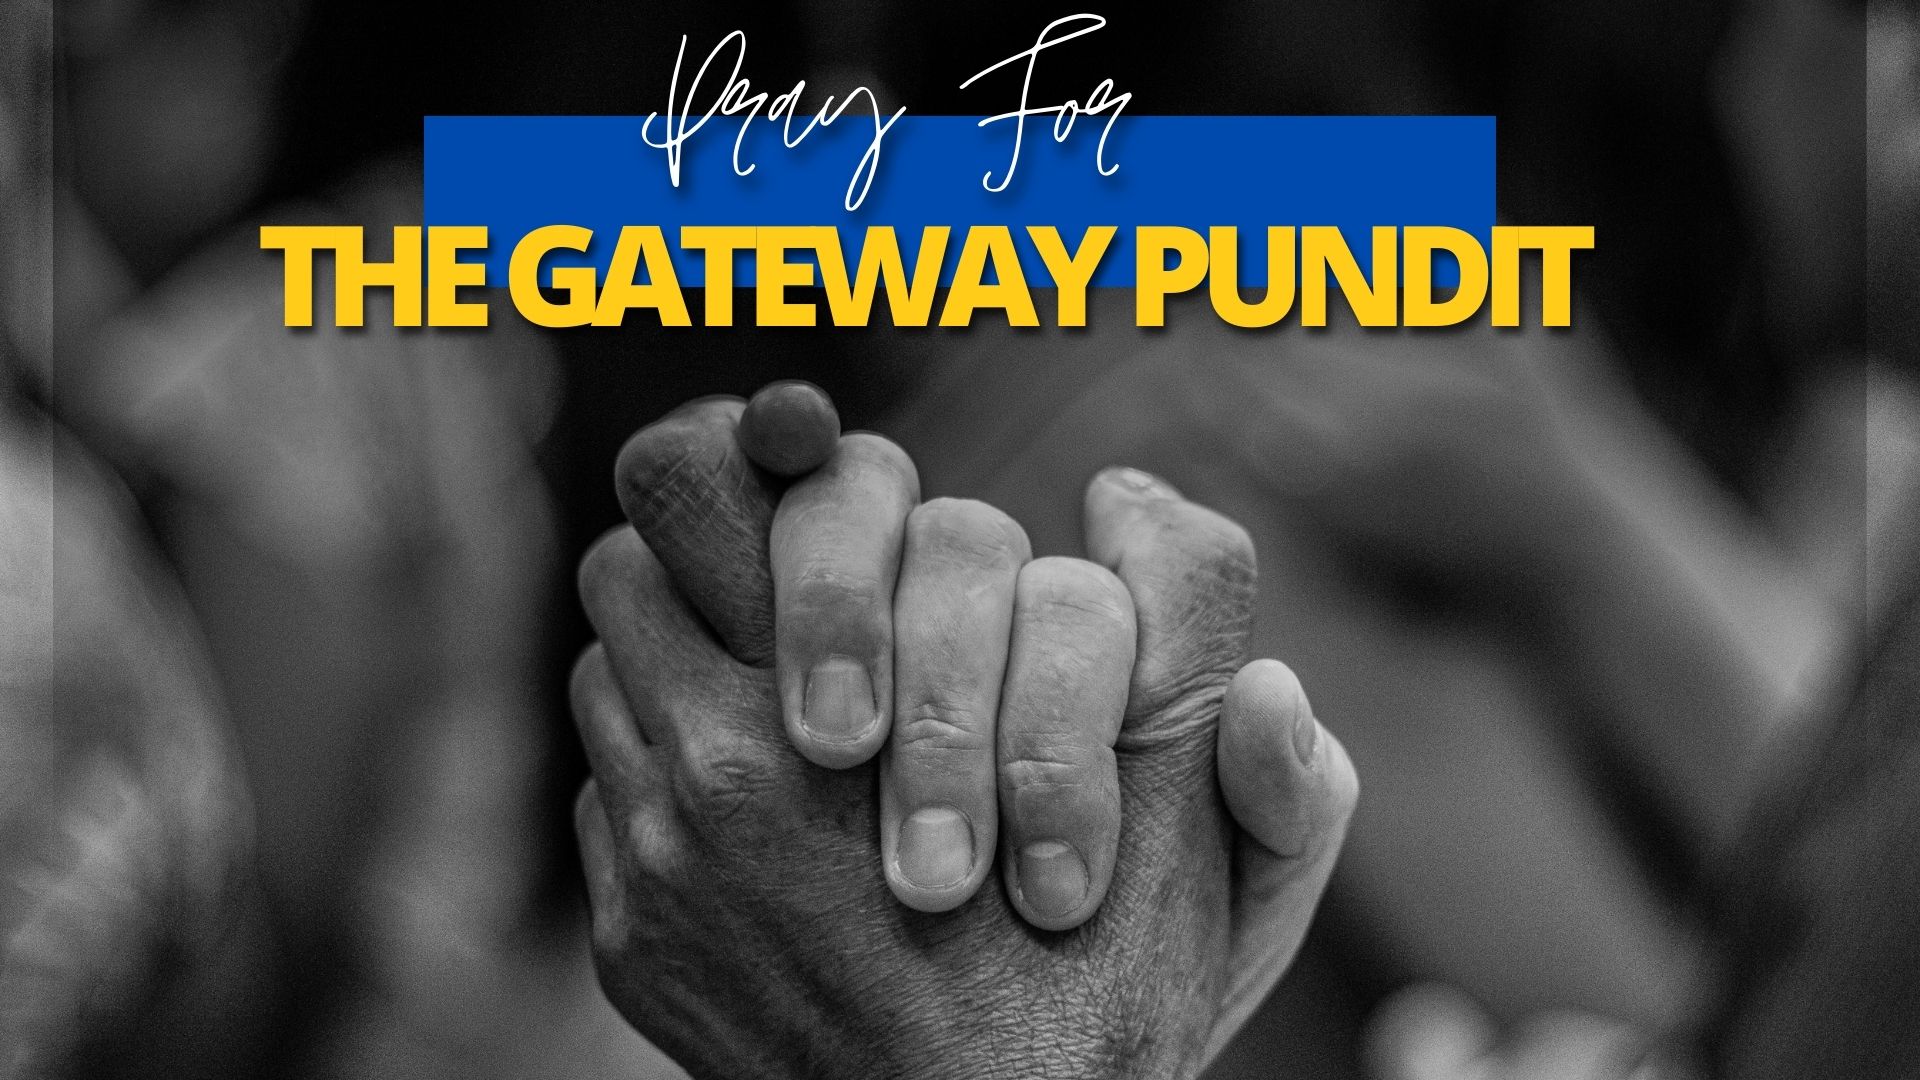 Please Pray for The Gateway Pundit – We Are Releasing Documents in Coming Days that Reveal Numerous Criminal Acts by the President and His Son Hunter